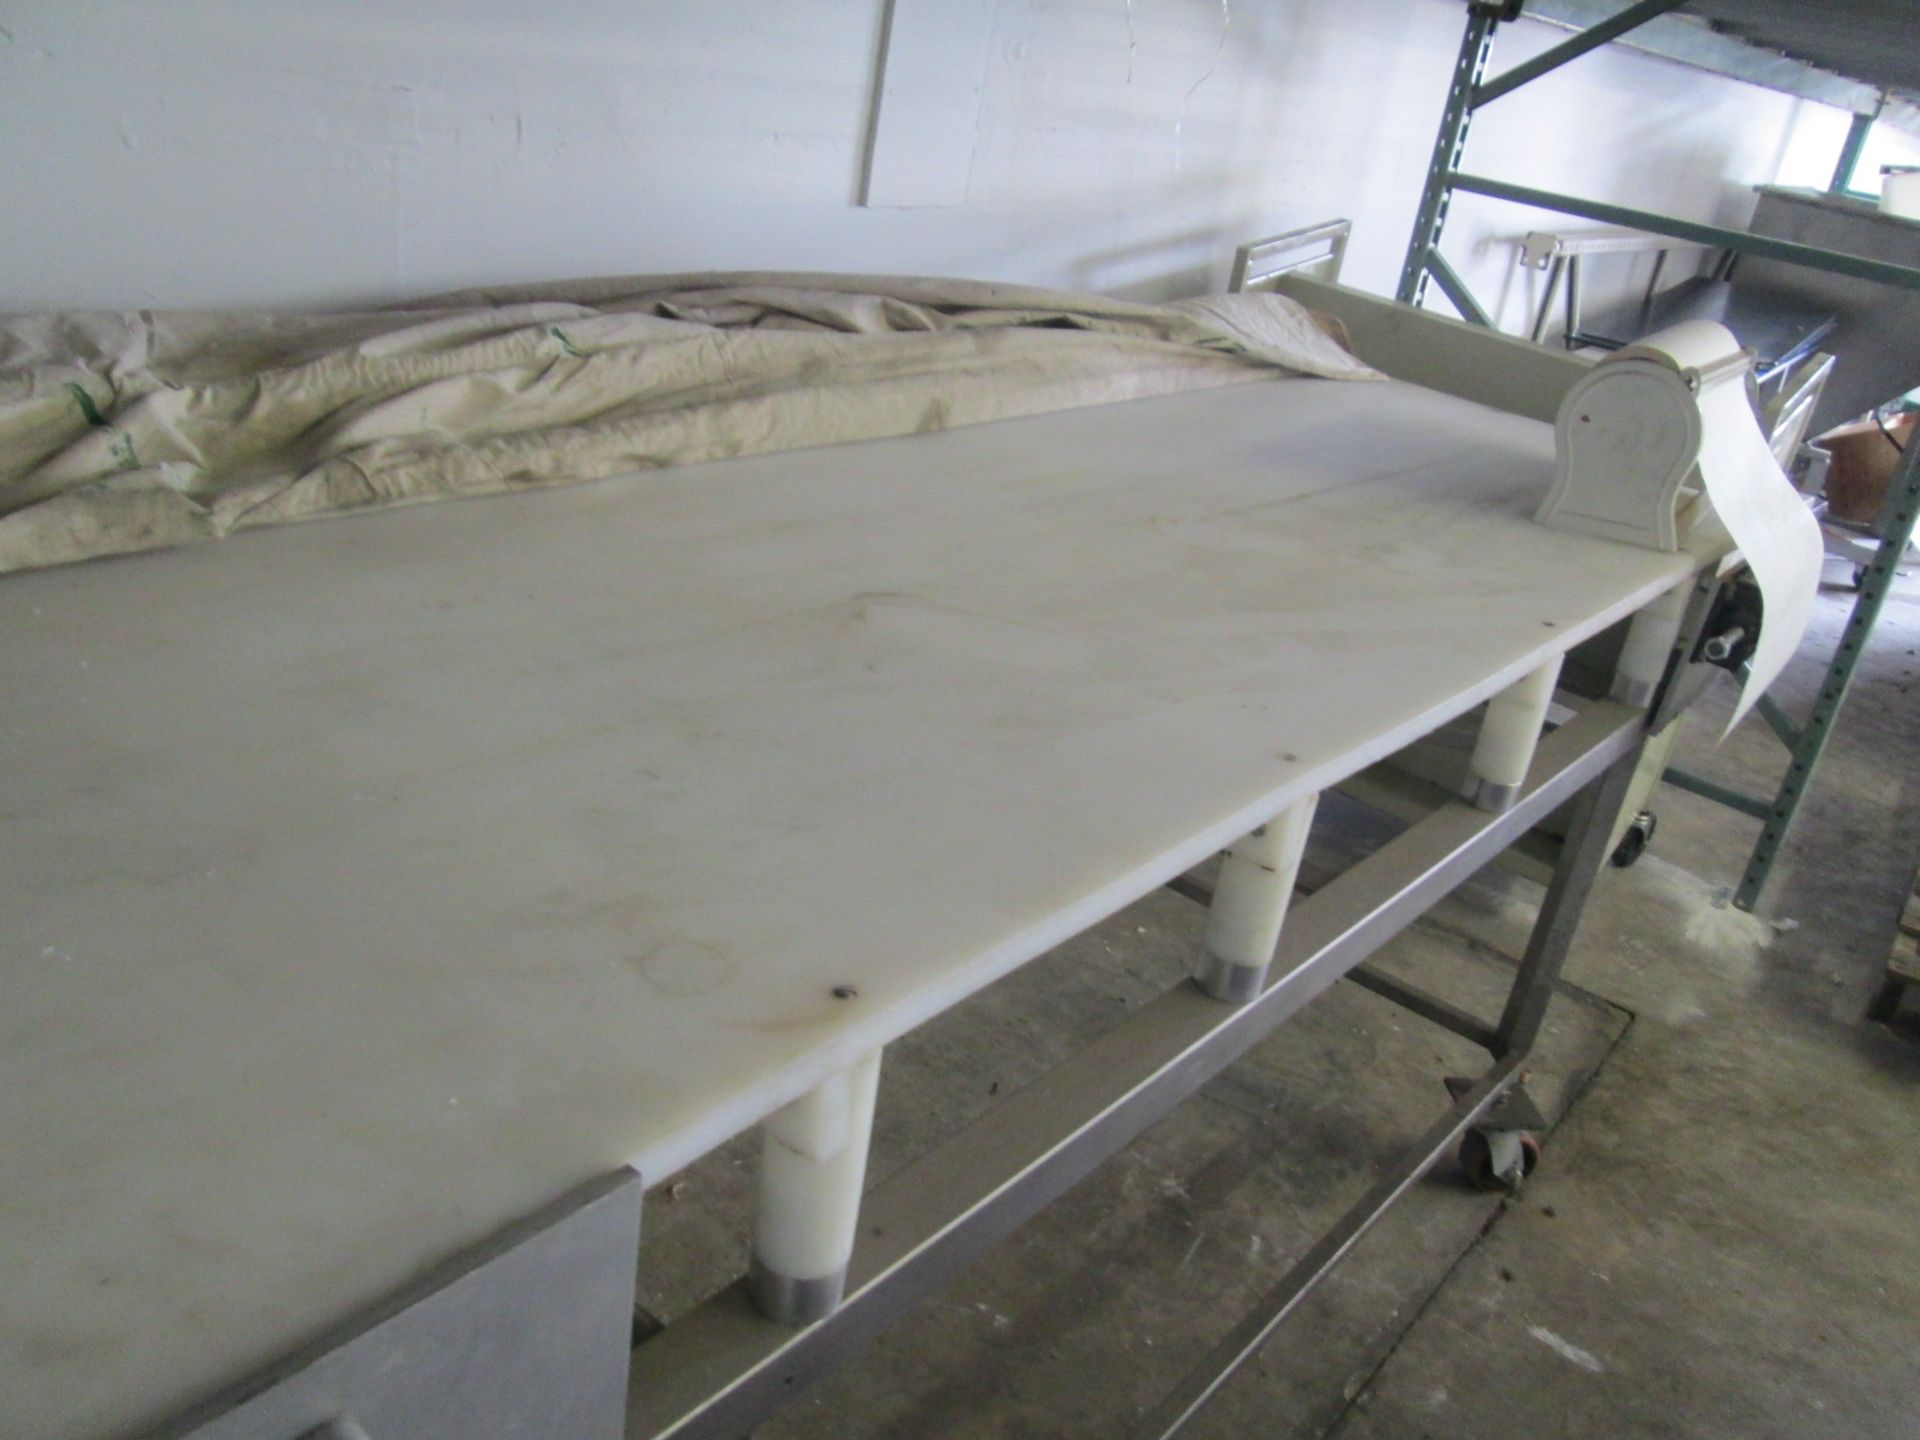 Stainless Steel Cut and Prep table, 40" x 100", food grade High Density PE tabletop, rollaway - Image 4 of 8